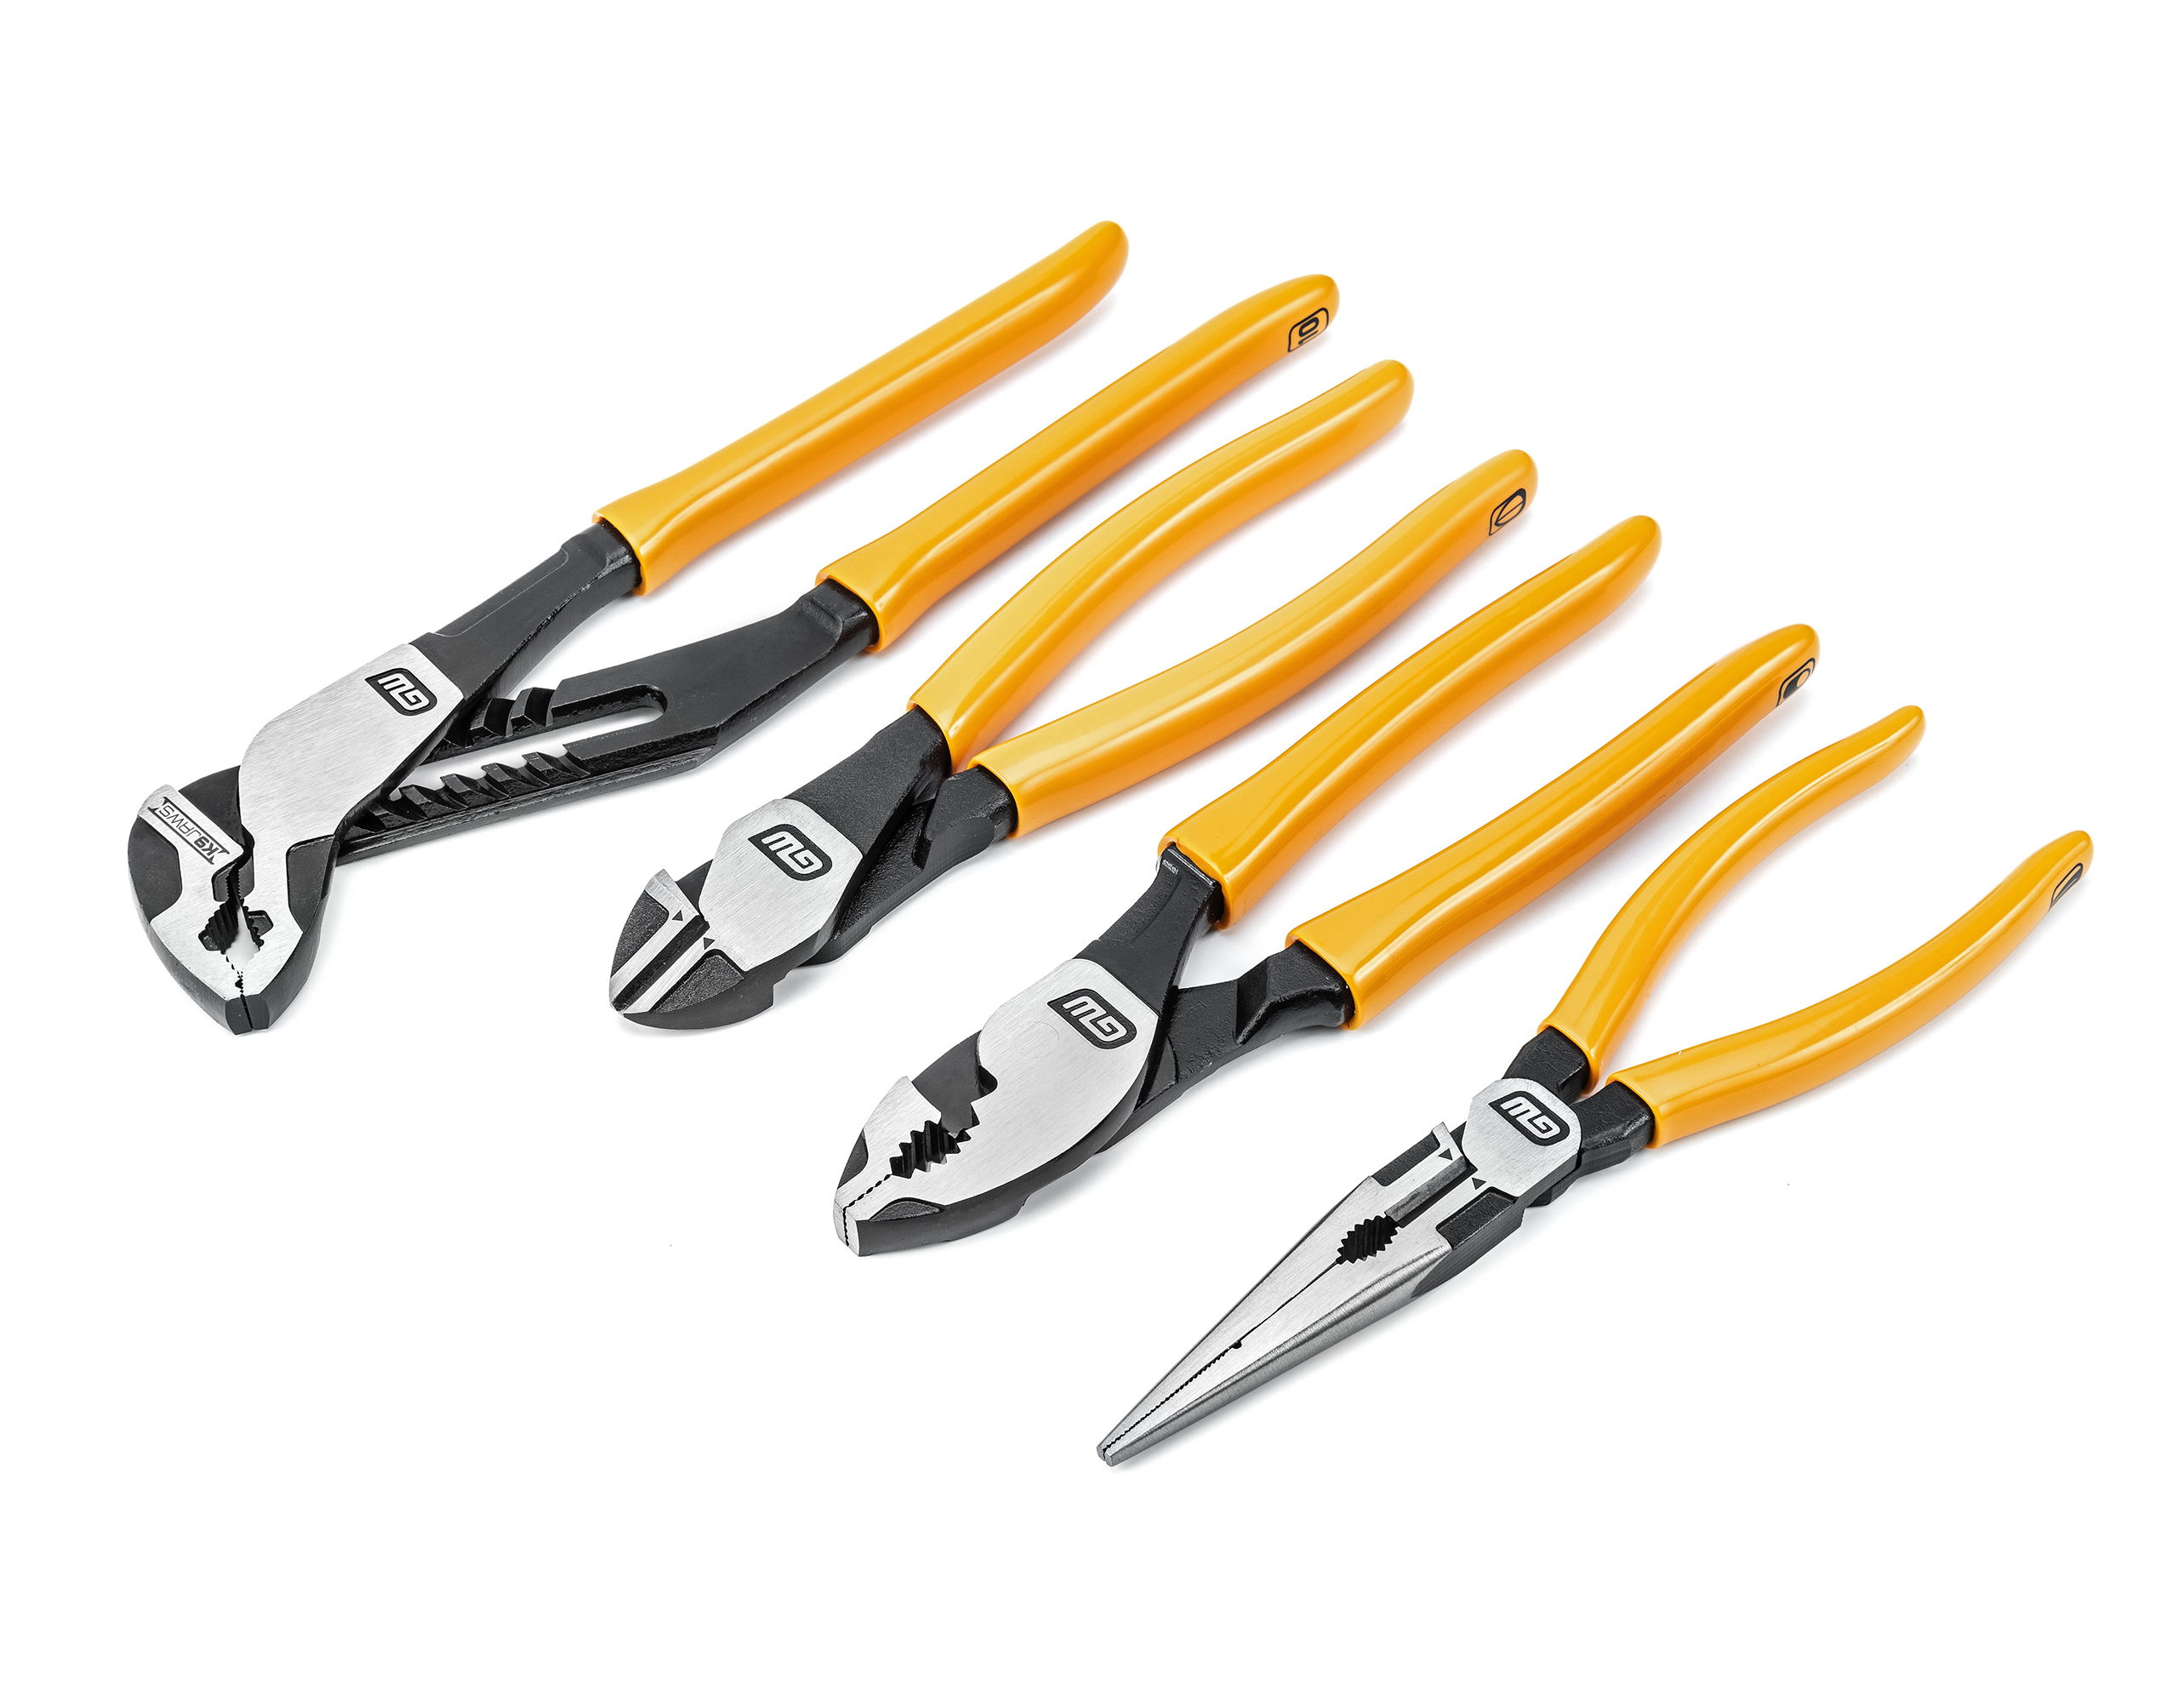 The new GEARWRENCH Pitbull Pliers are available with dipped handles (as shown here) for easy cleaning or with dual-material comfort grip handles for a more comfortable grip.